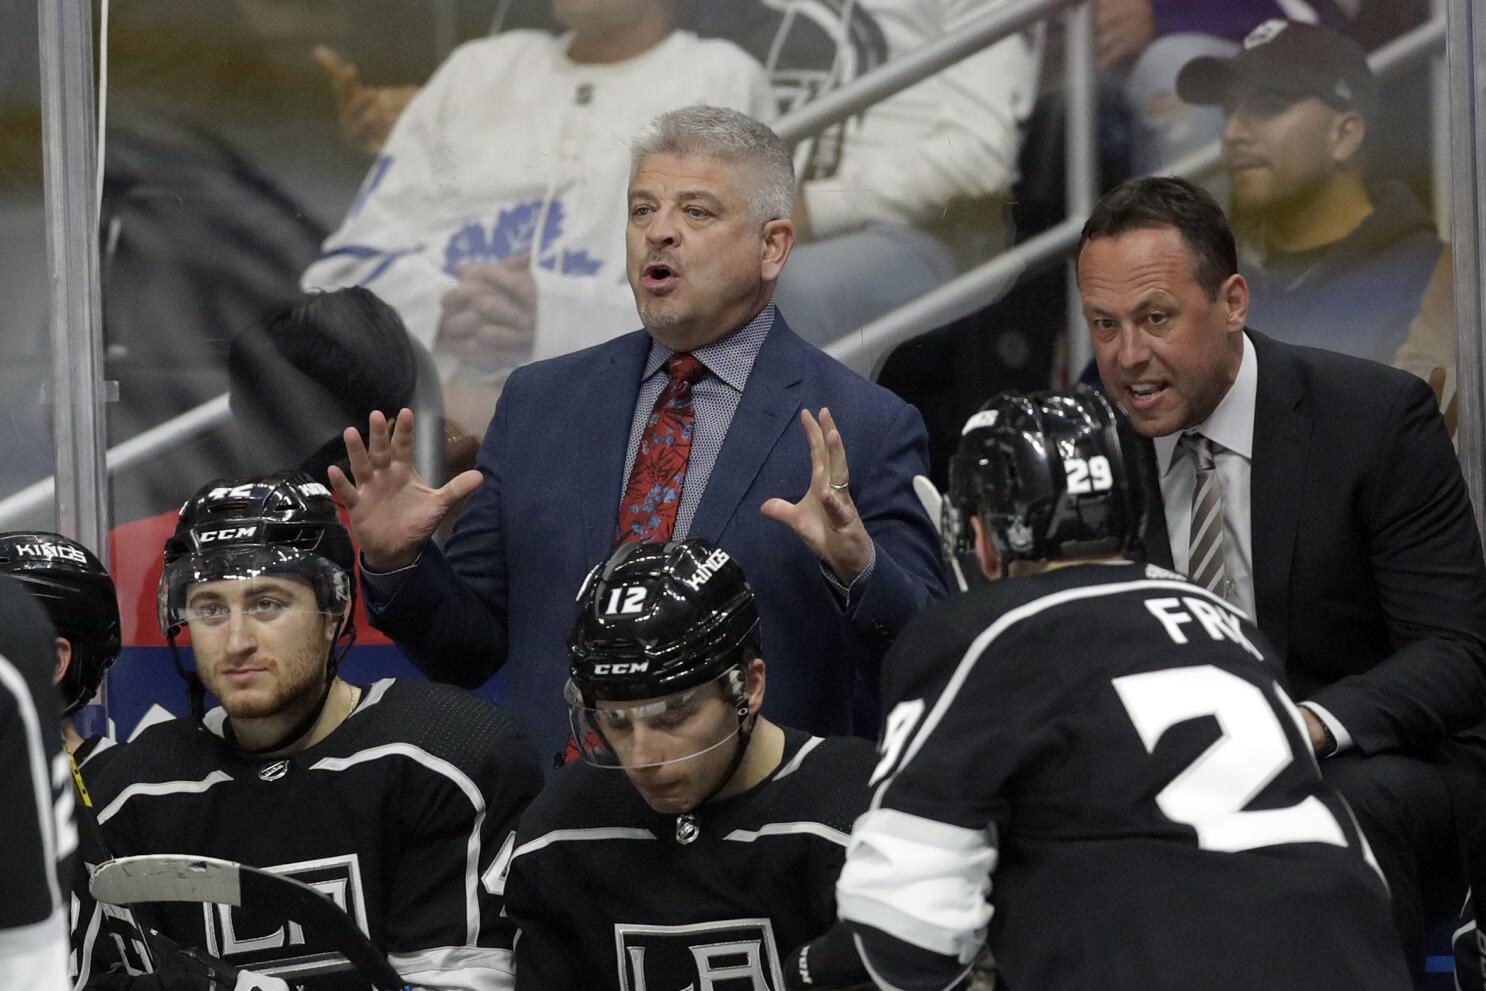 Knights end NHL's pause by taking on Kings in L.A.